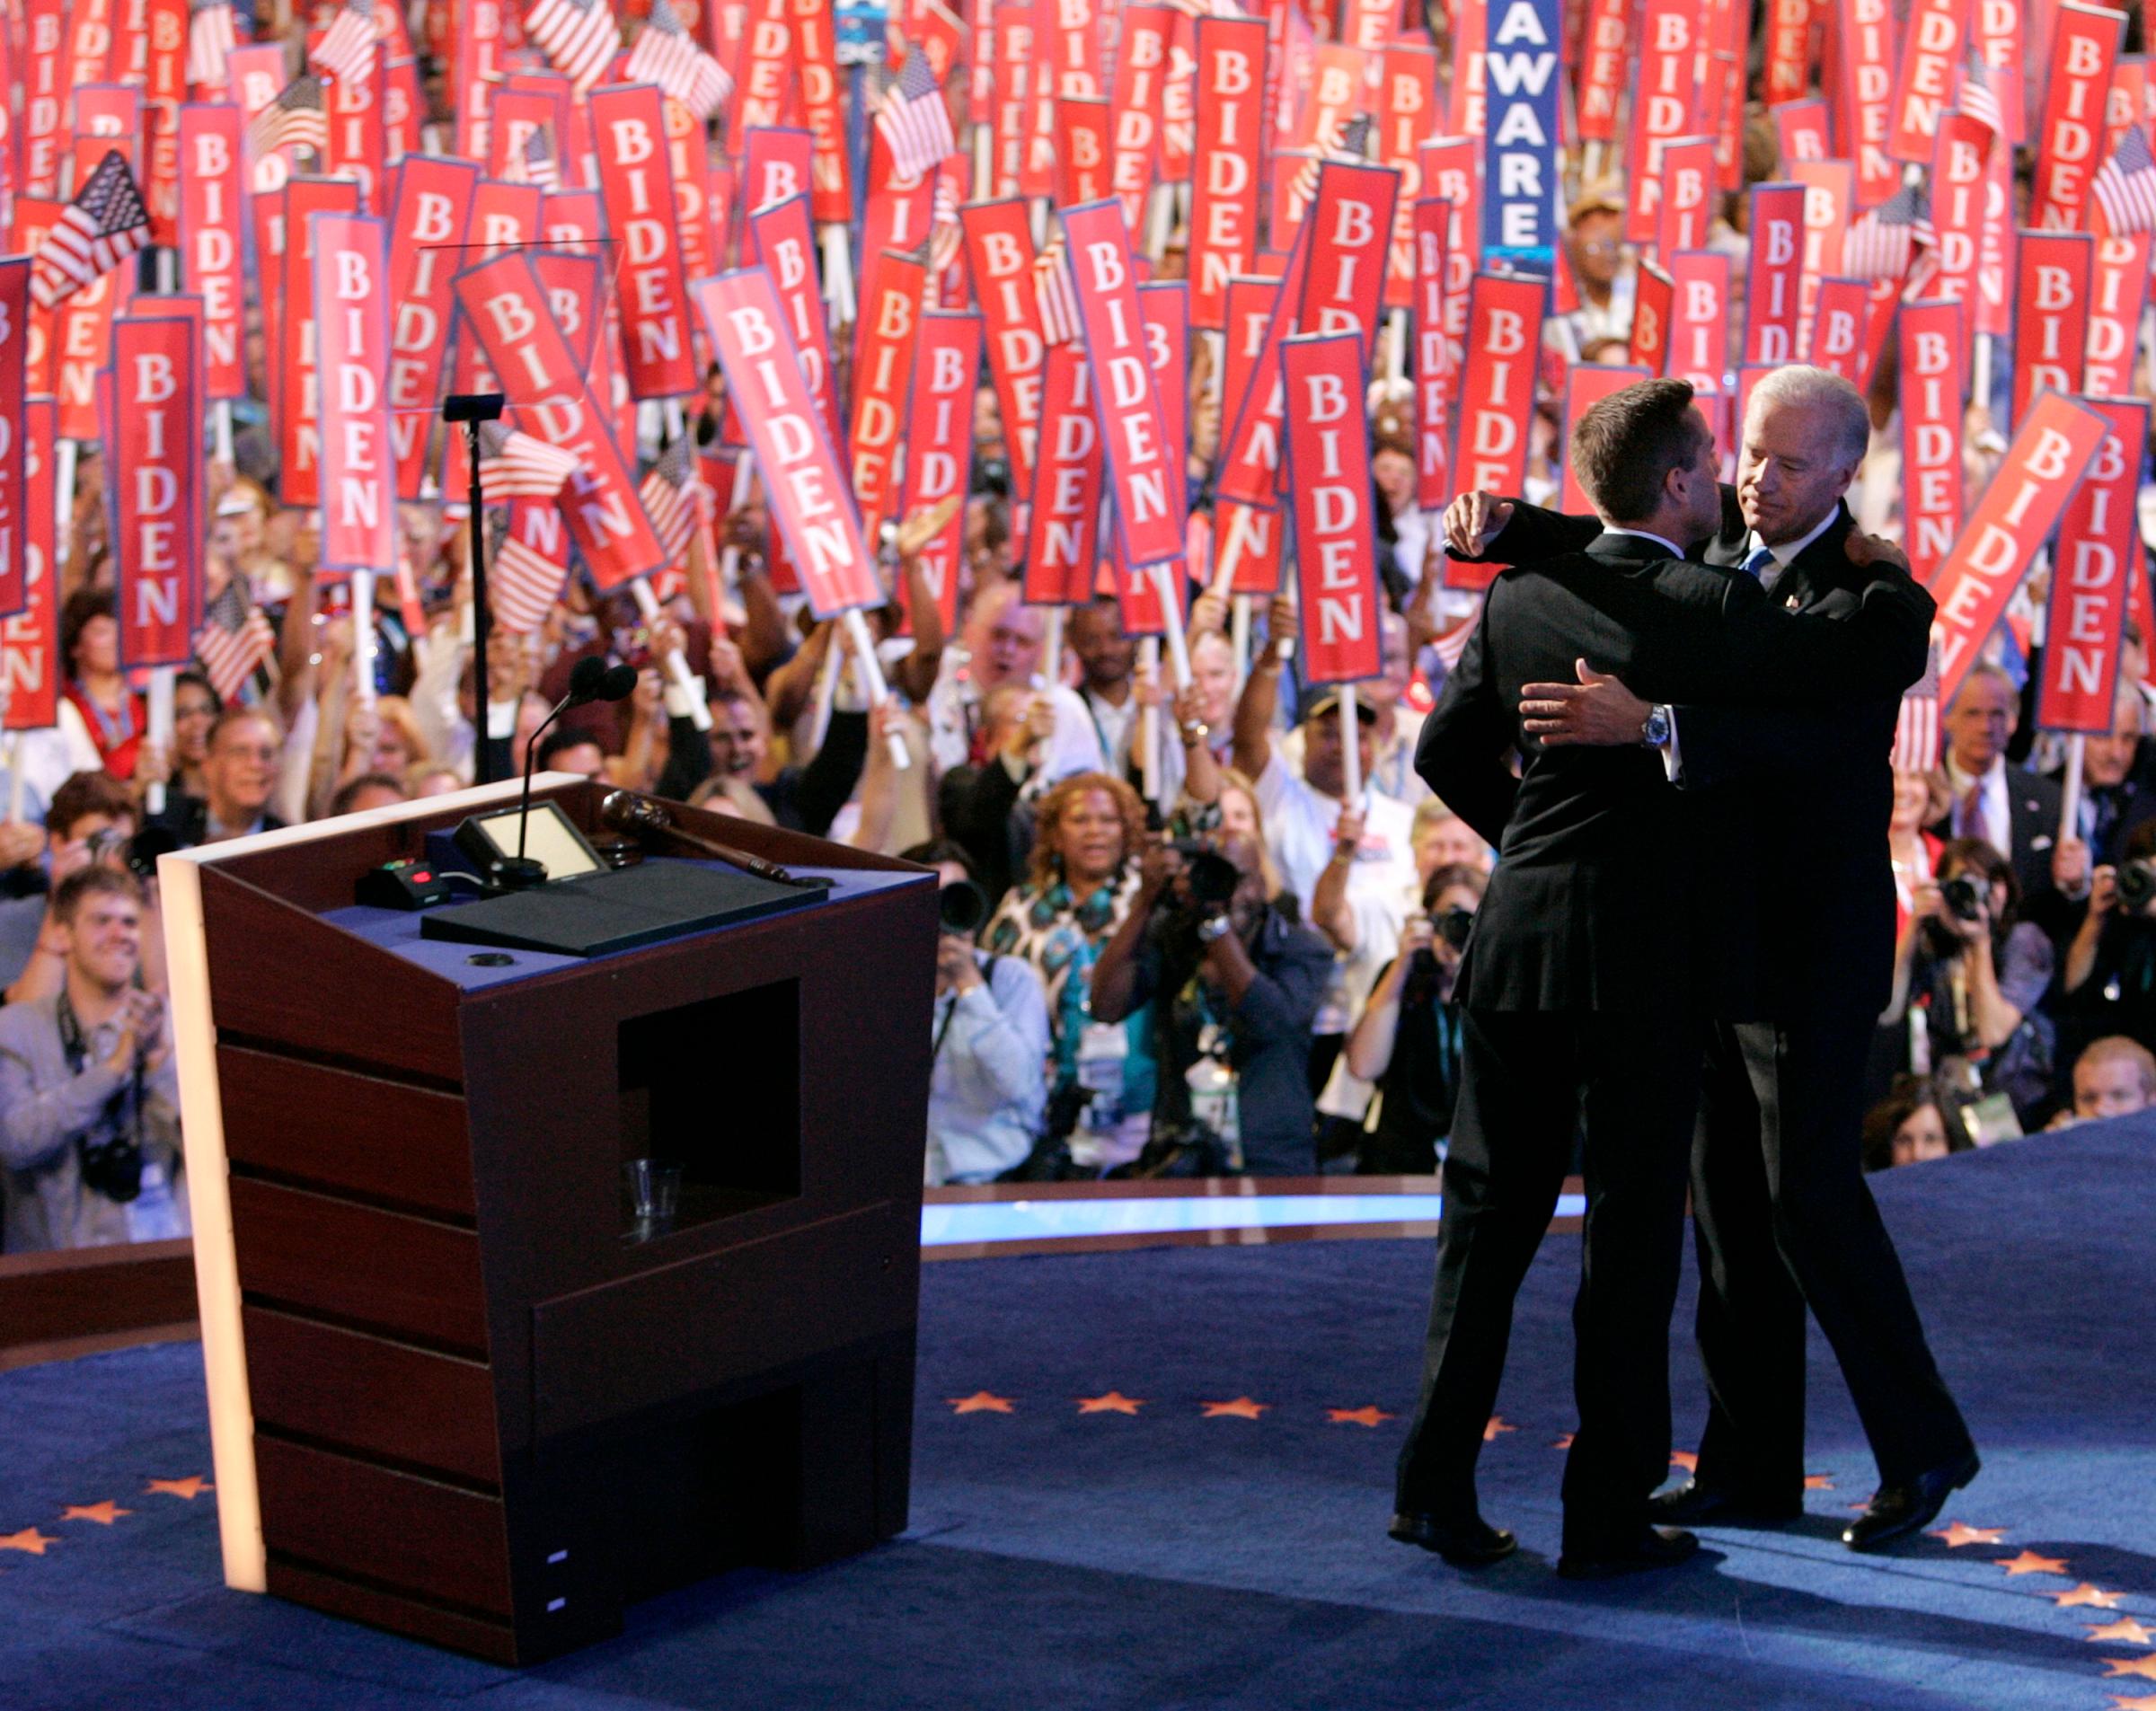 Vice presidential candidate Senator Joe Biden embraces son Beau at the 2008 Democratic National Convention in Denver